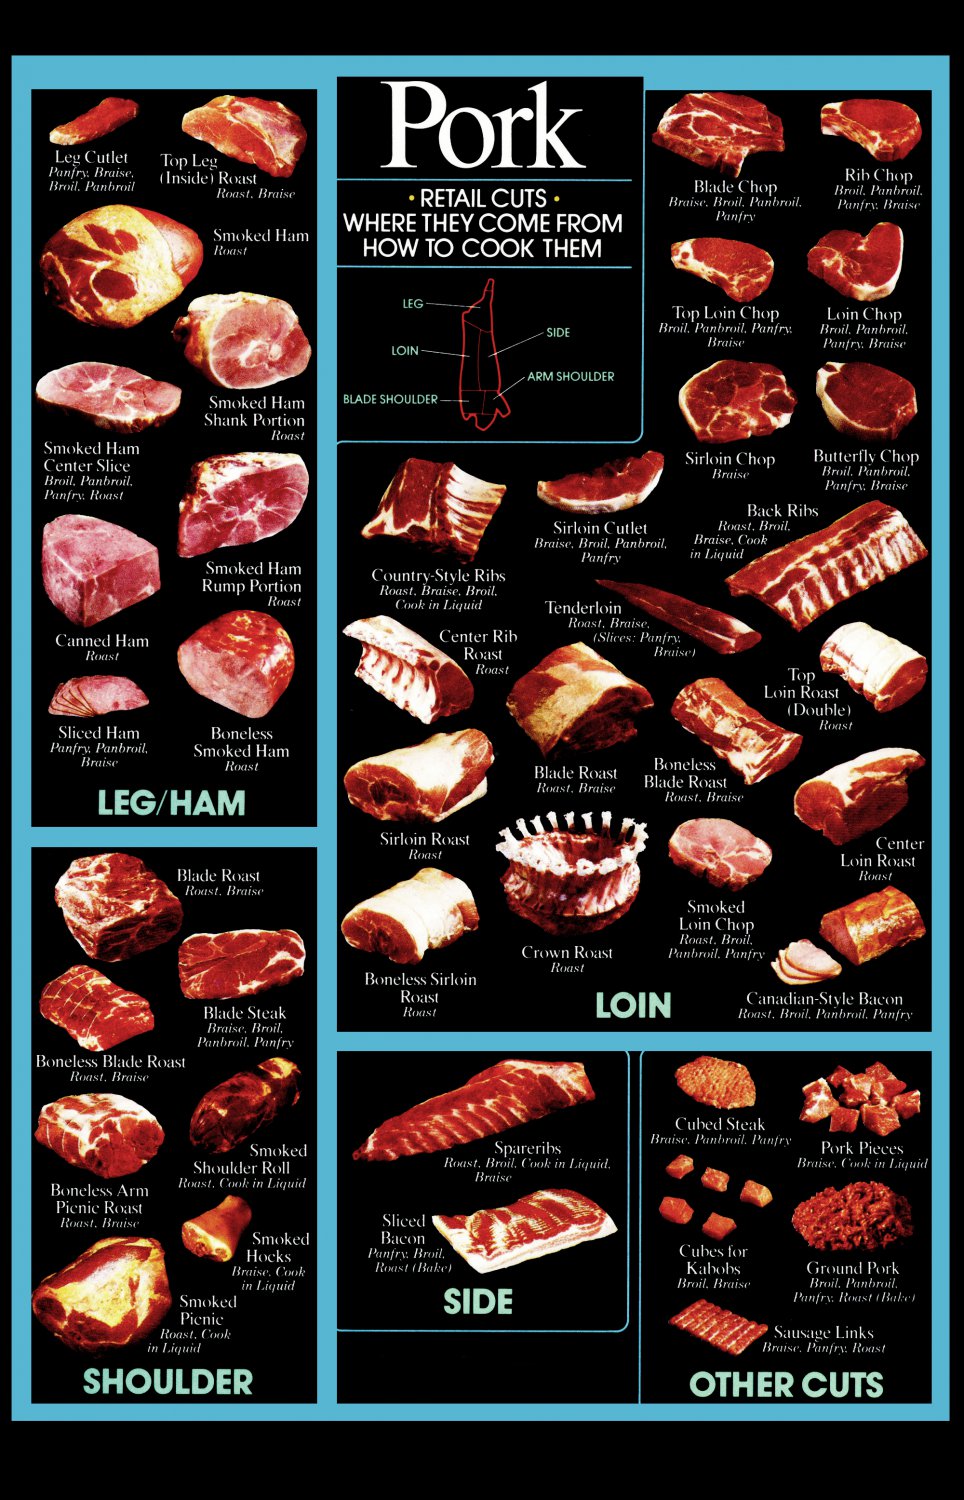 Pork Cuts Where they come from How to cook them Chart 13"x19" (32cm/49cm) Polyester Fabric Poster